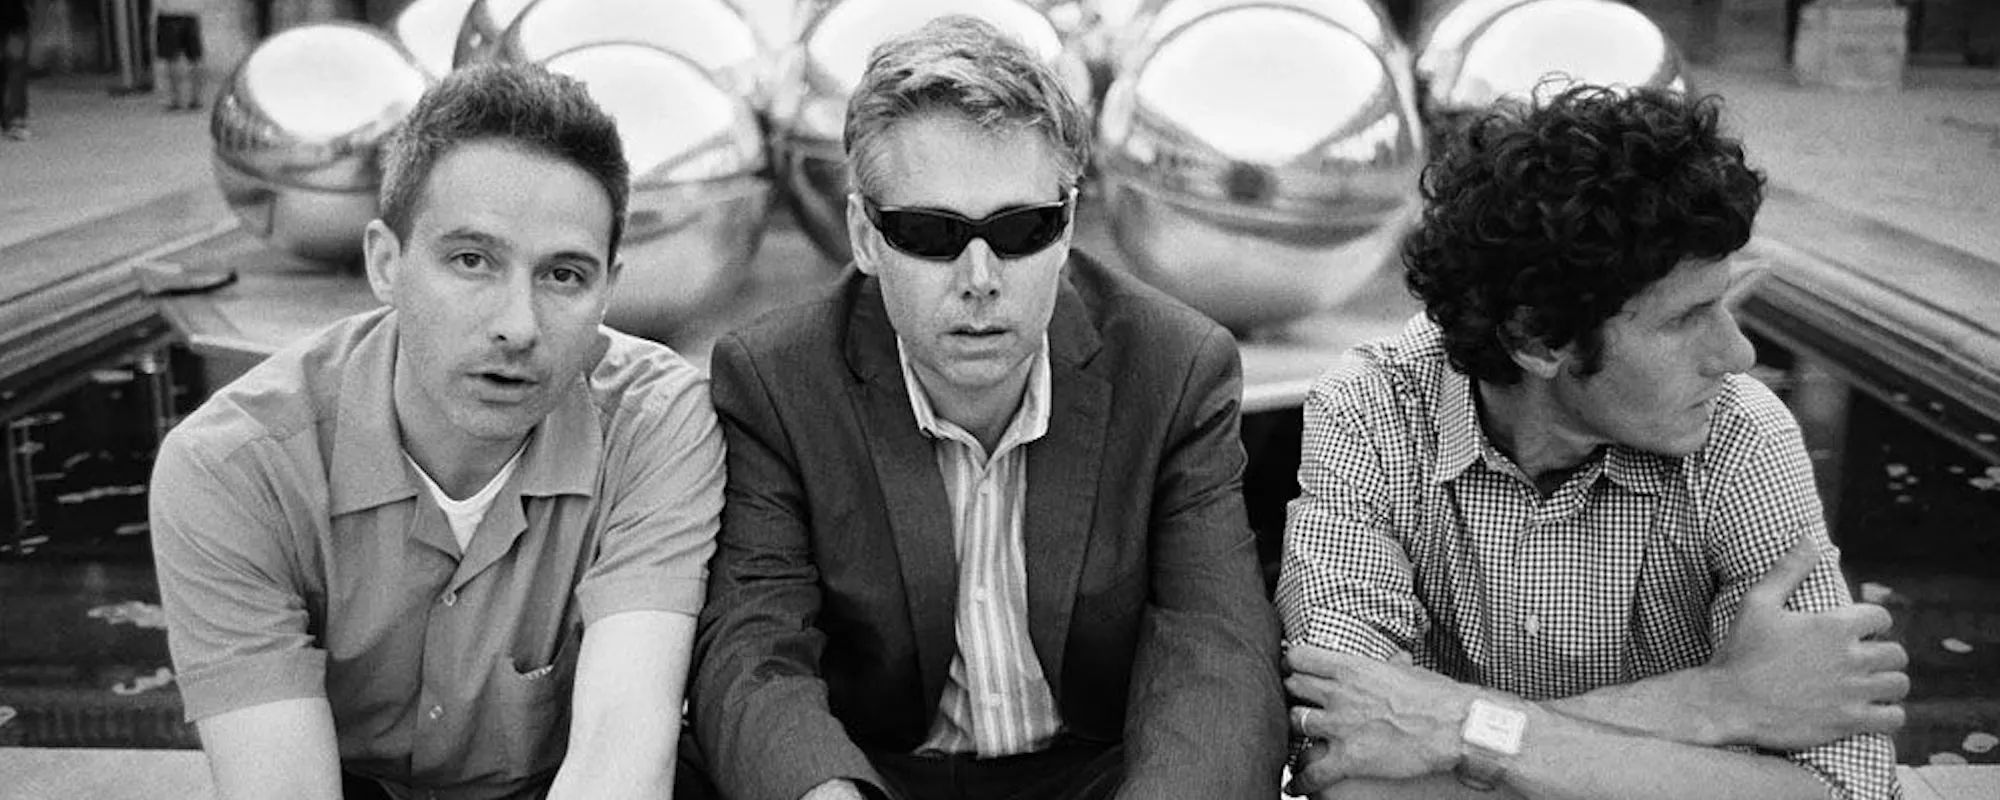 Behind the Meaning of the Band Name: Beastie Boys